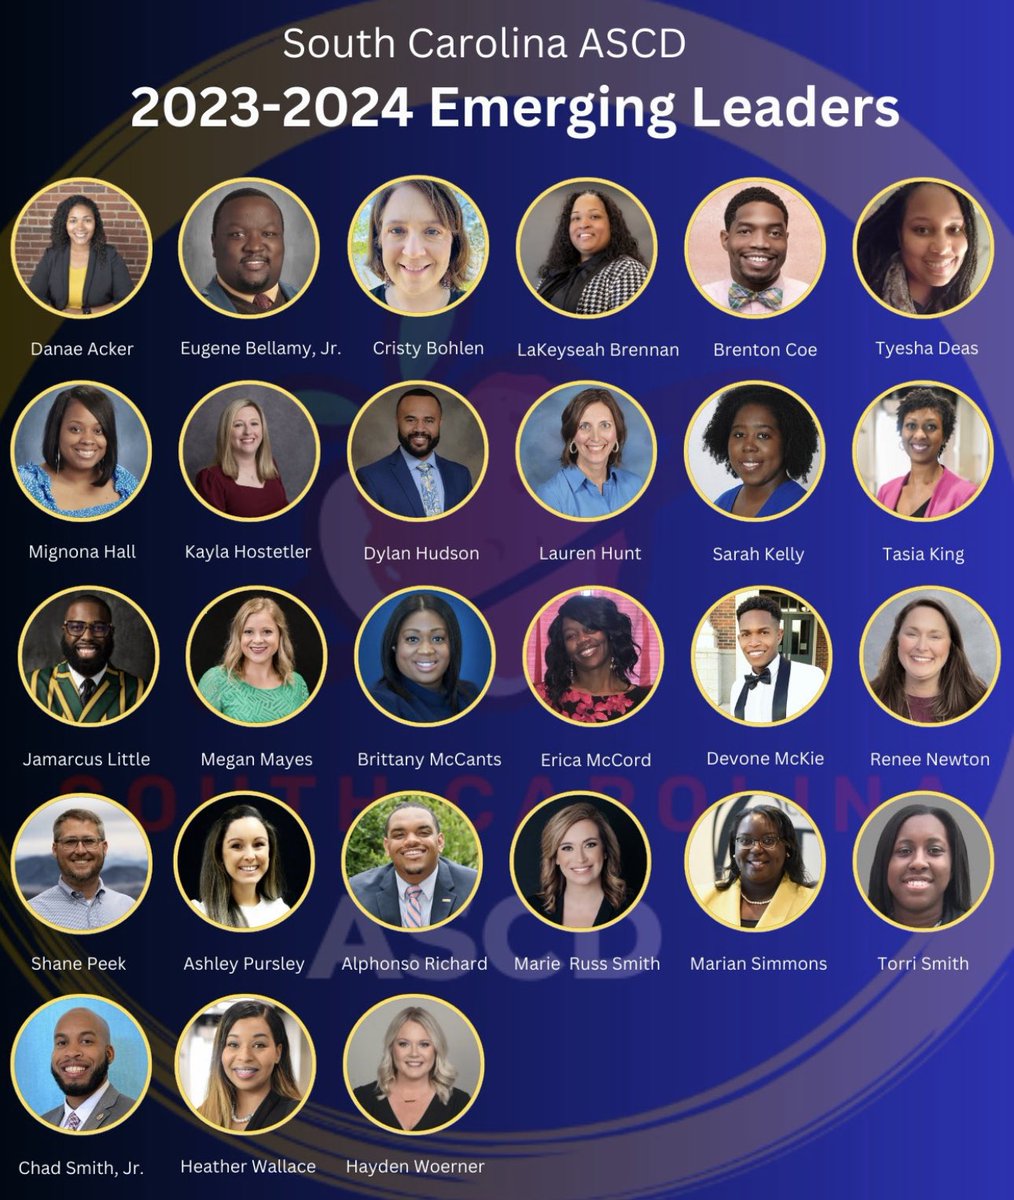 The BOLD Leadership Network congratulates Mr. Chad Smith on his selection to the SCASCD Emerging Leaders Class of 2023 - 2024.

#BOLDIsAChoice #loveSCschools #scascdEL @AleoSmith06